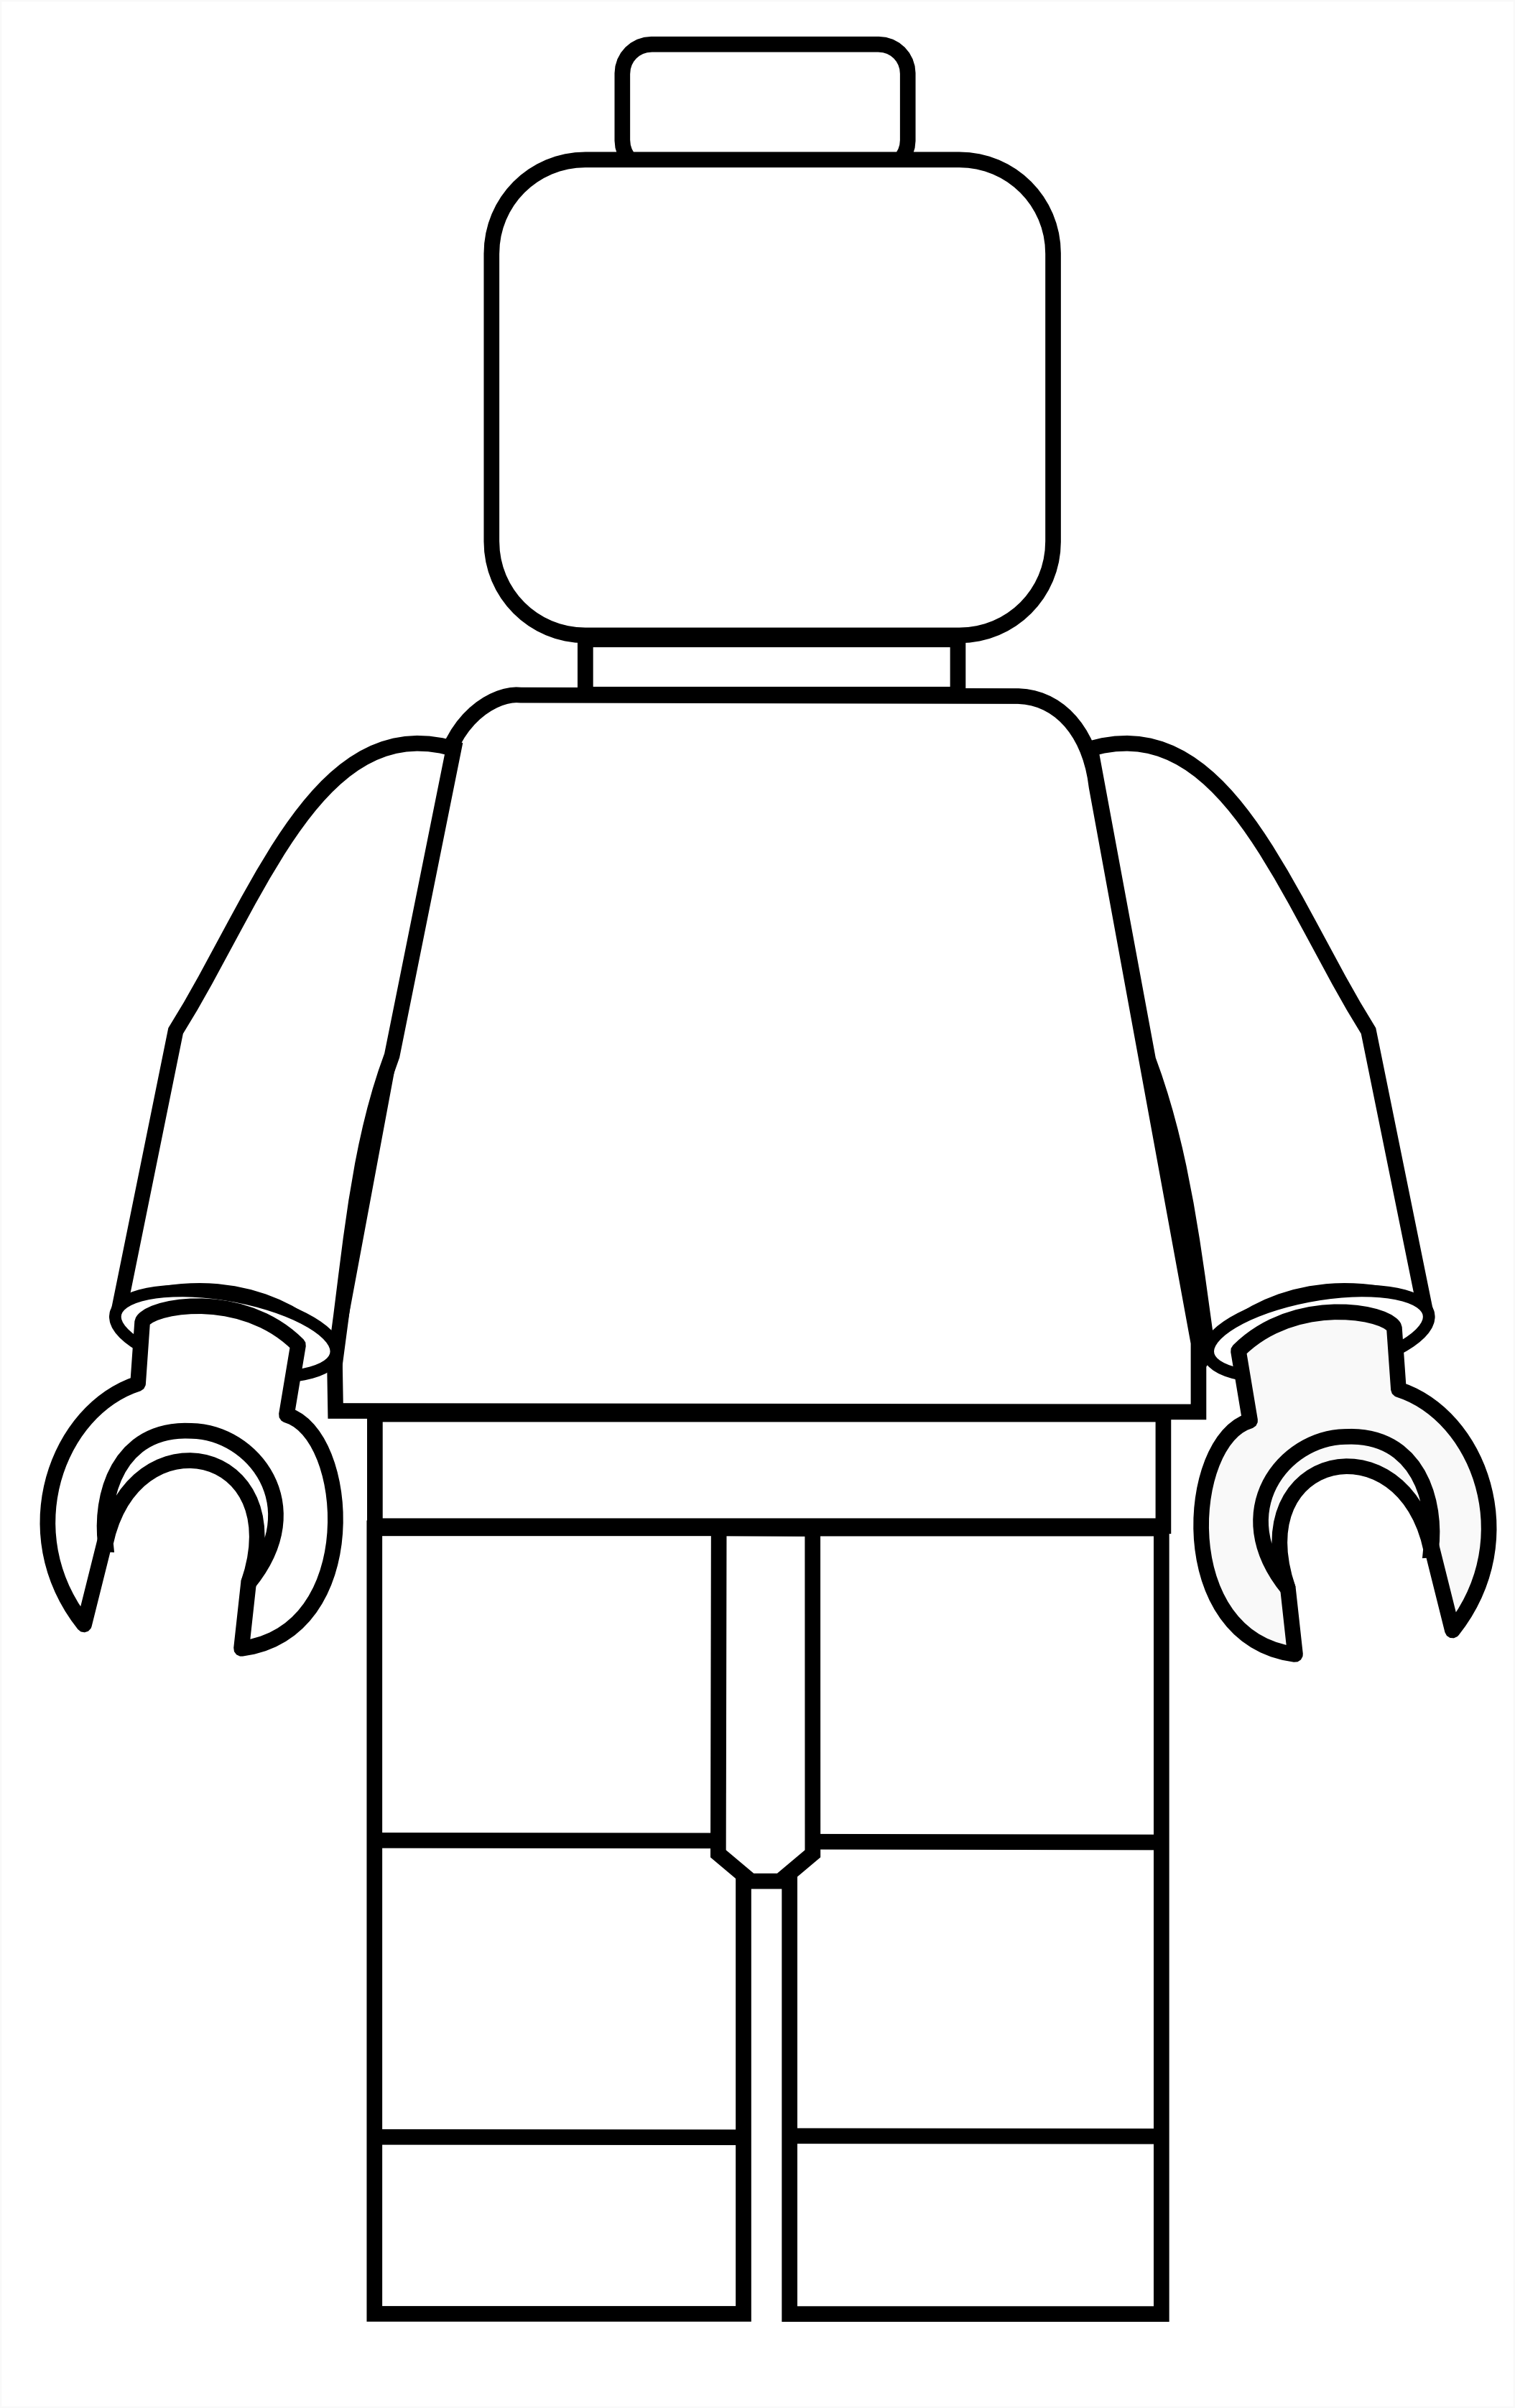 22 Outline Drawing Of A Person Free Cliparts That You Can Download ...